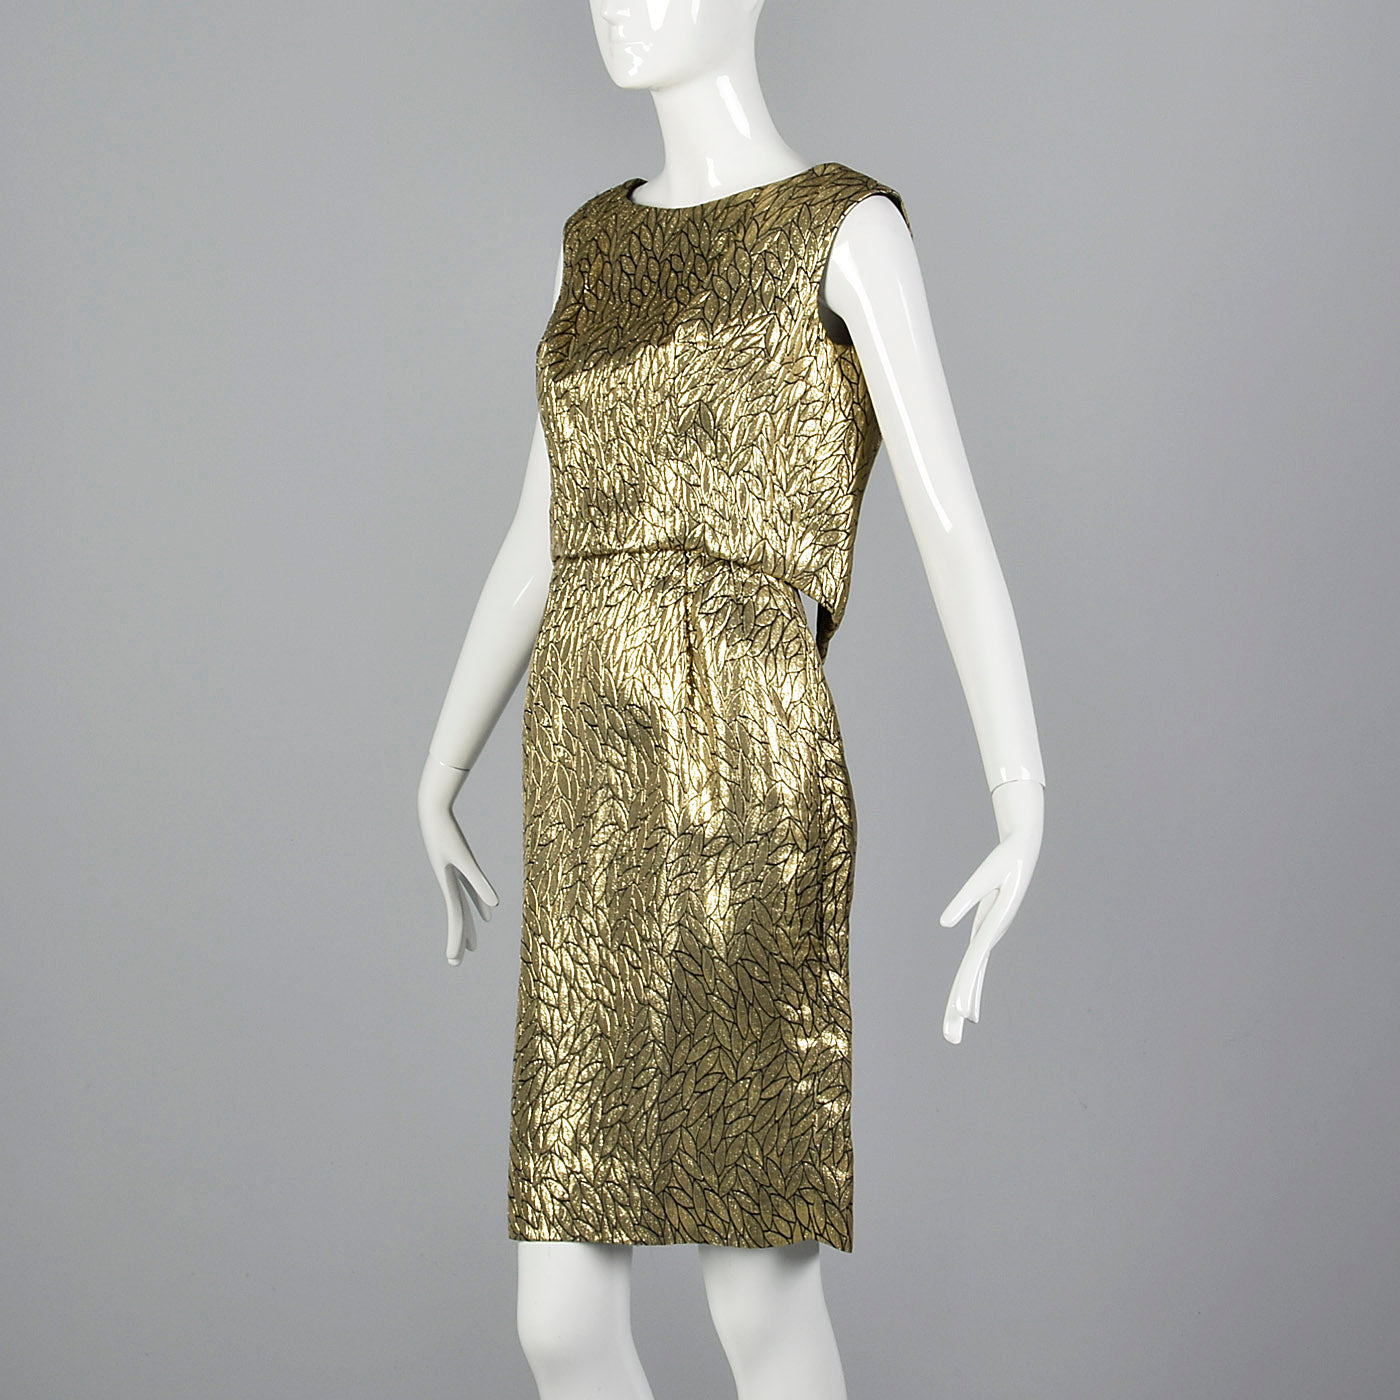 1960s Metallic Gold Dress with Leaf Style Pattern